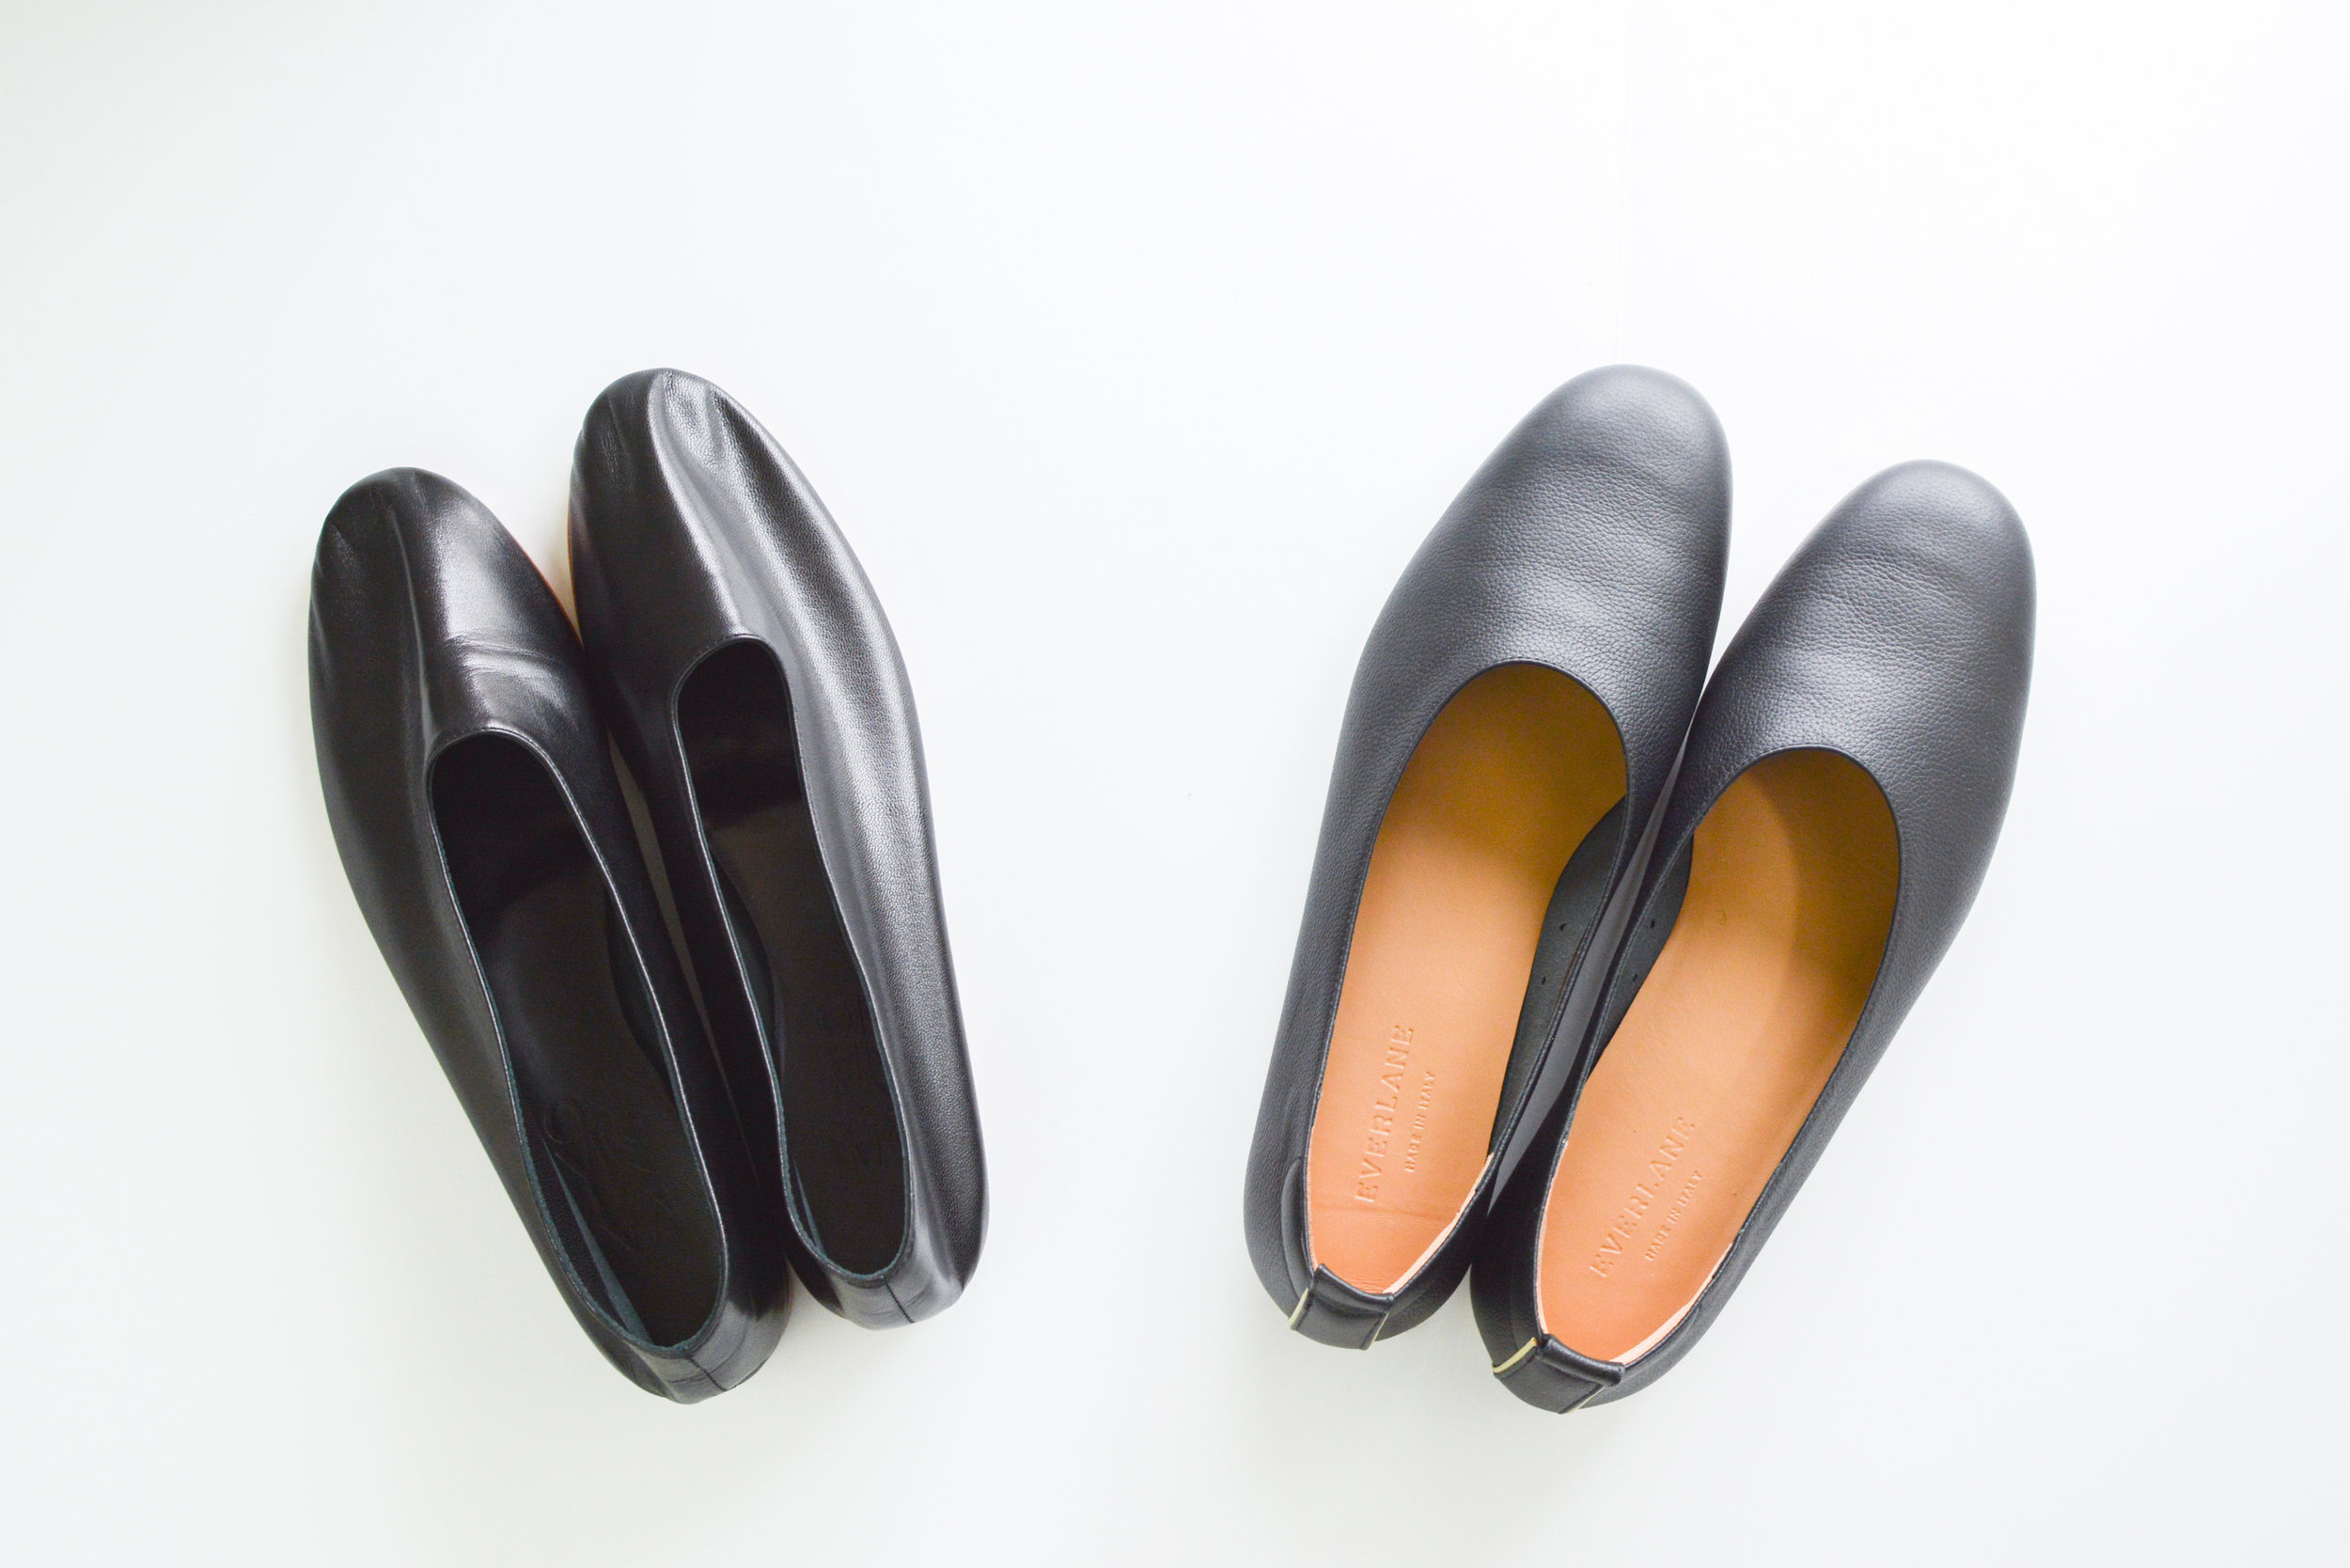 Martiniano Glove Shoe Review vs. Everlane's Day Glove — Fairly Curated